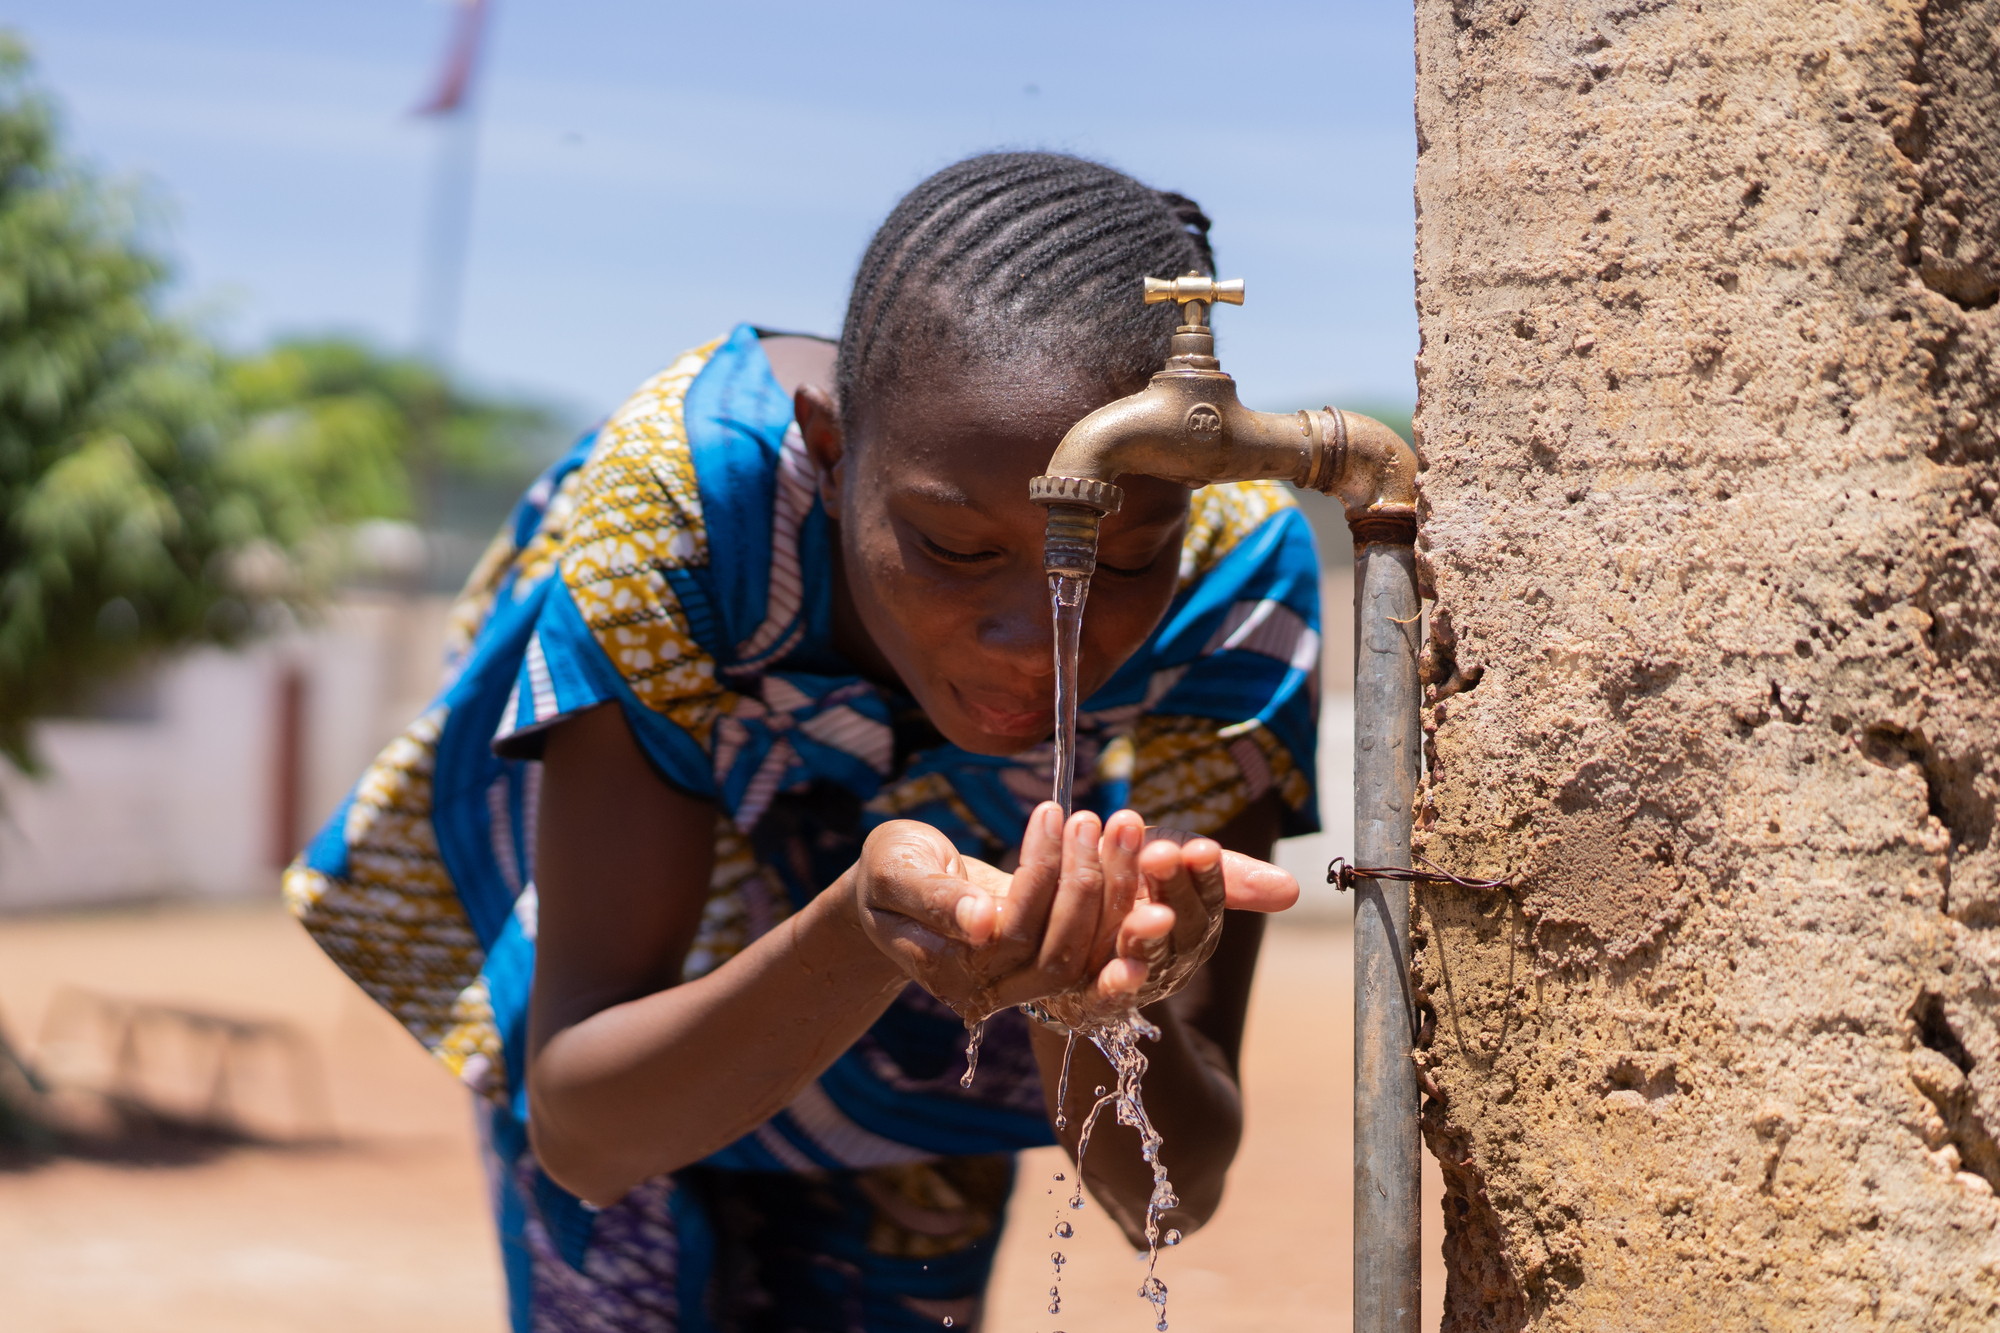 2.2 B PEOPLE GLOBALLY STILL DON’T HAVE ACCESS TO SAFE DRINKING WATER